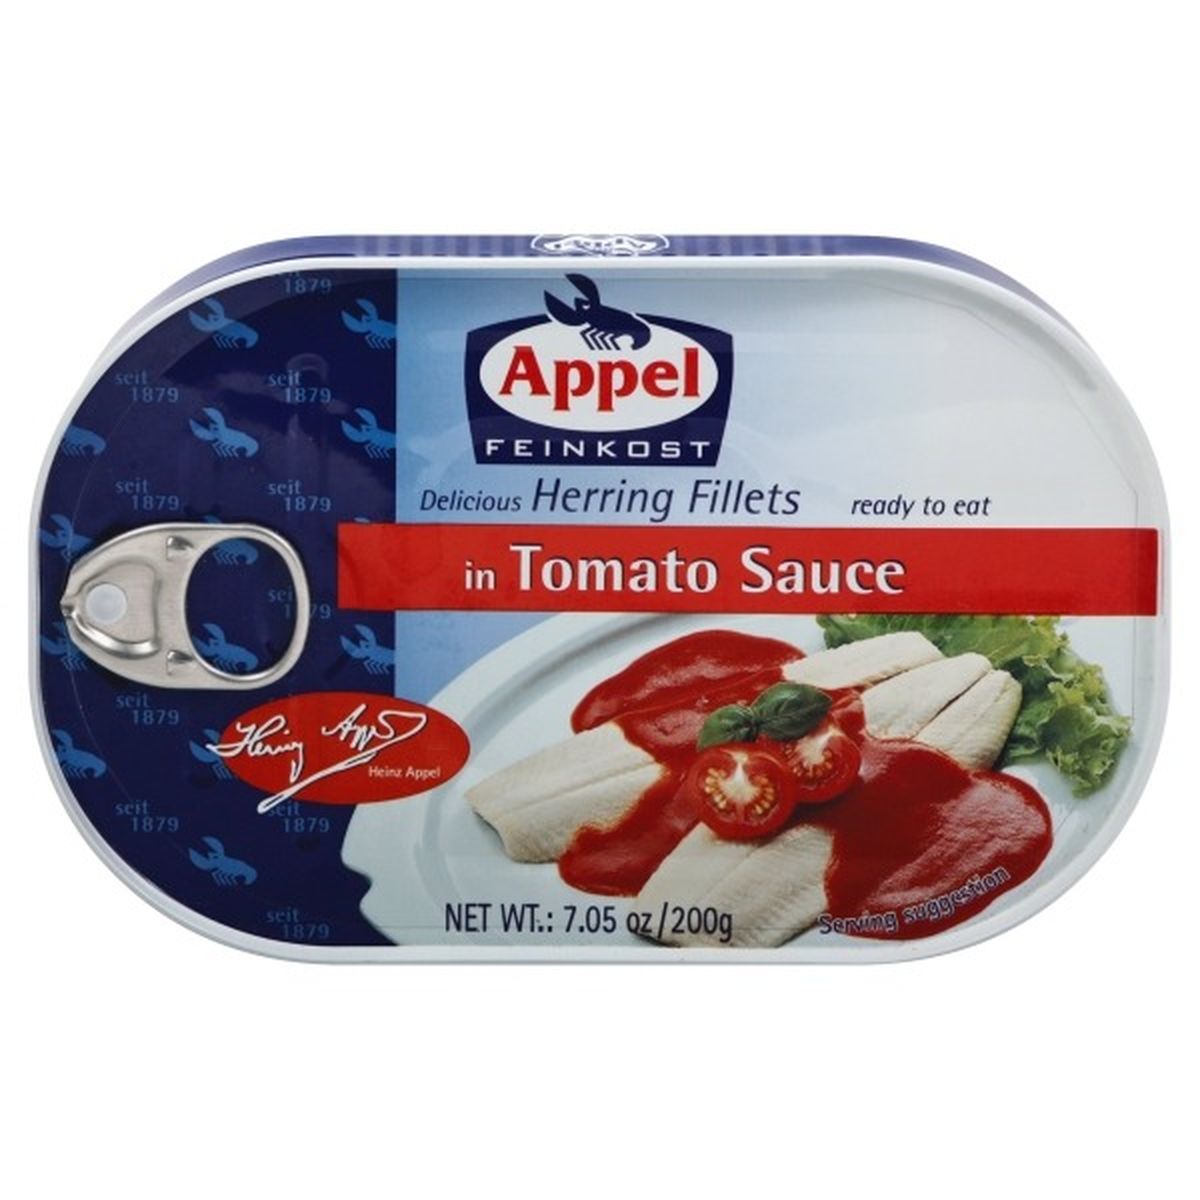 Calories in Appel Herring Fillets, in Tomato Sauce